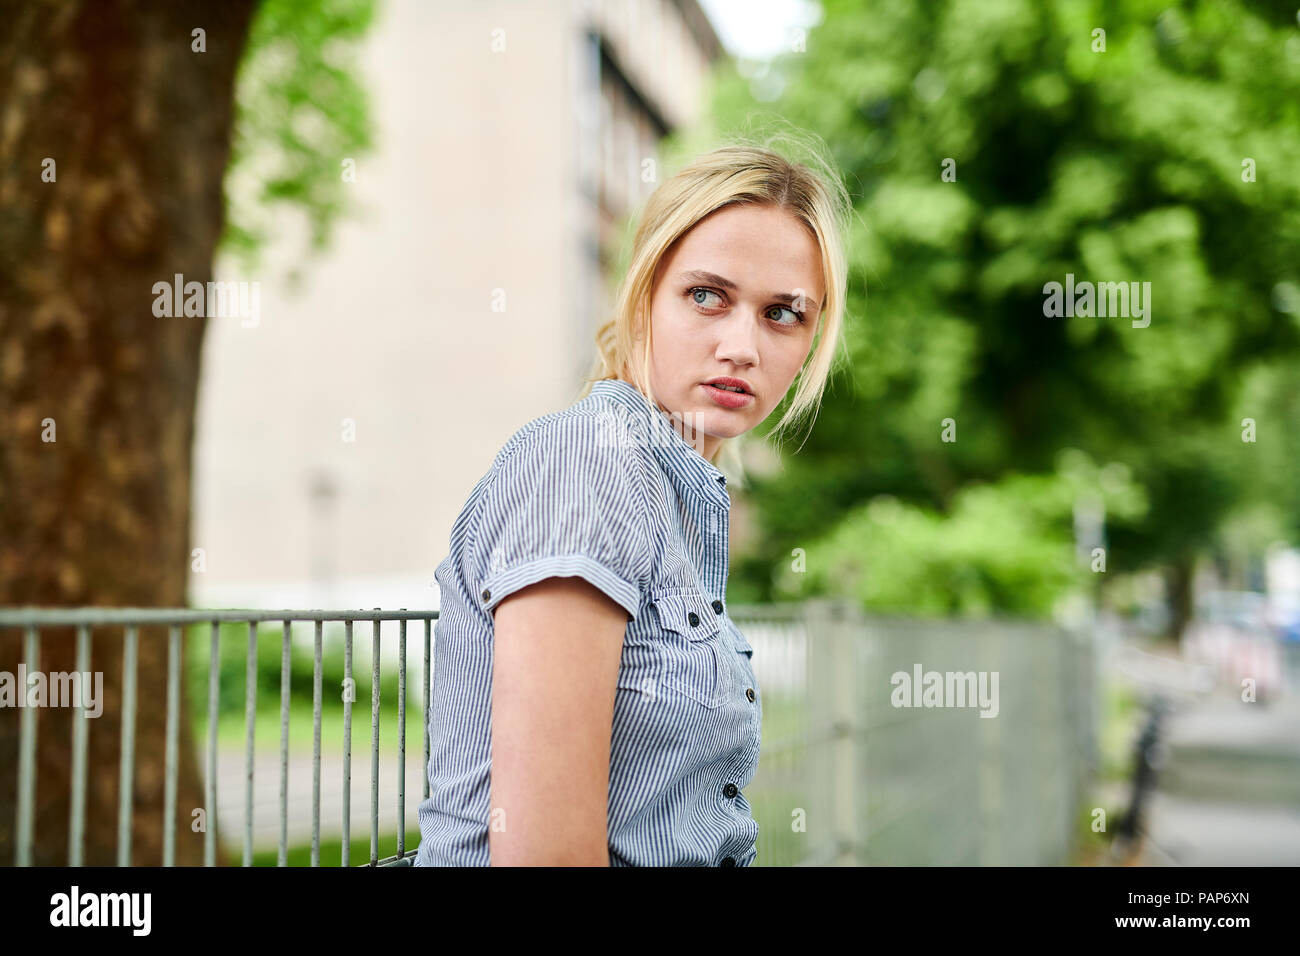 Serious blond young woman at a fence Stock Photo